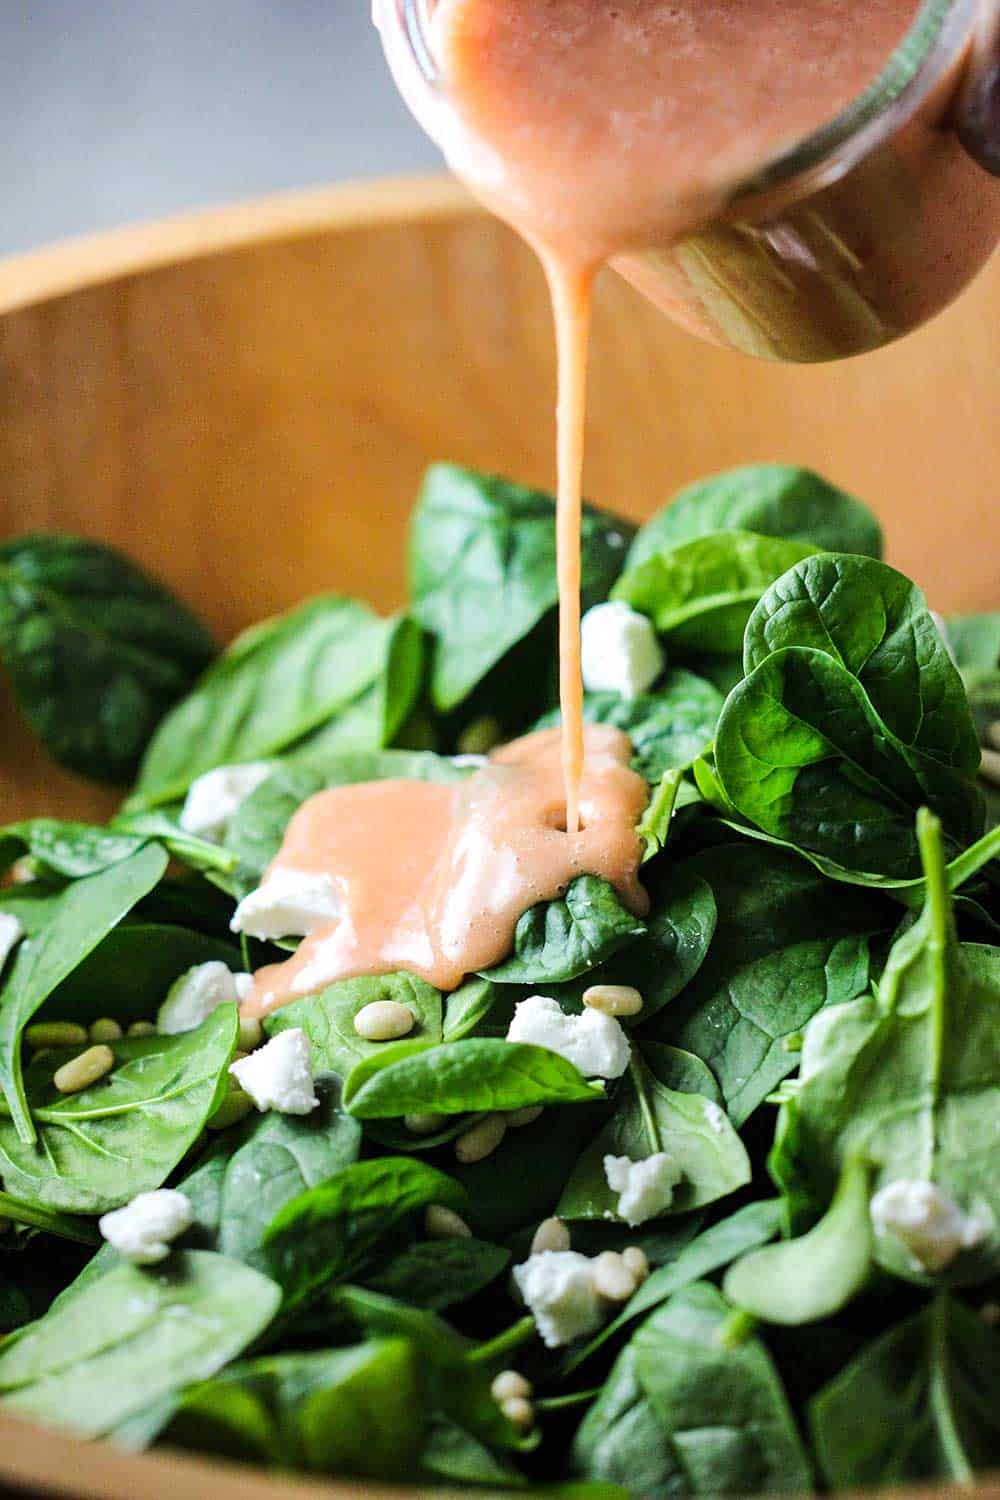 A jar of strawberry vinaigrette being poured into a wooden bowl filled with baby spinach.